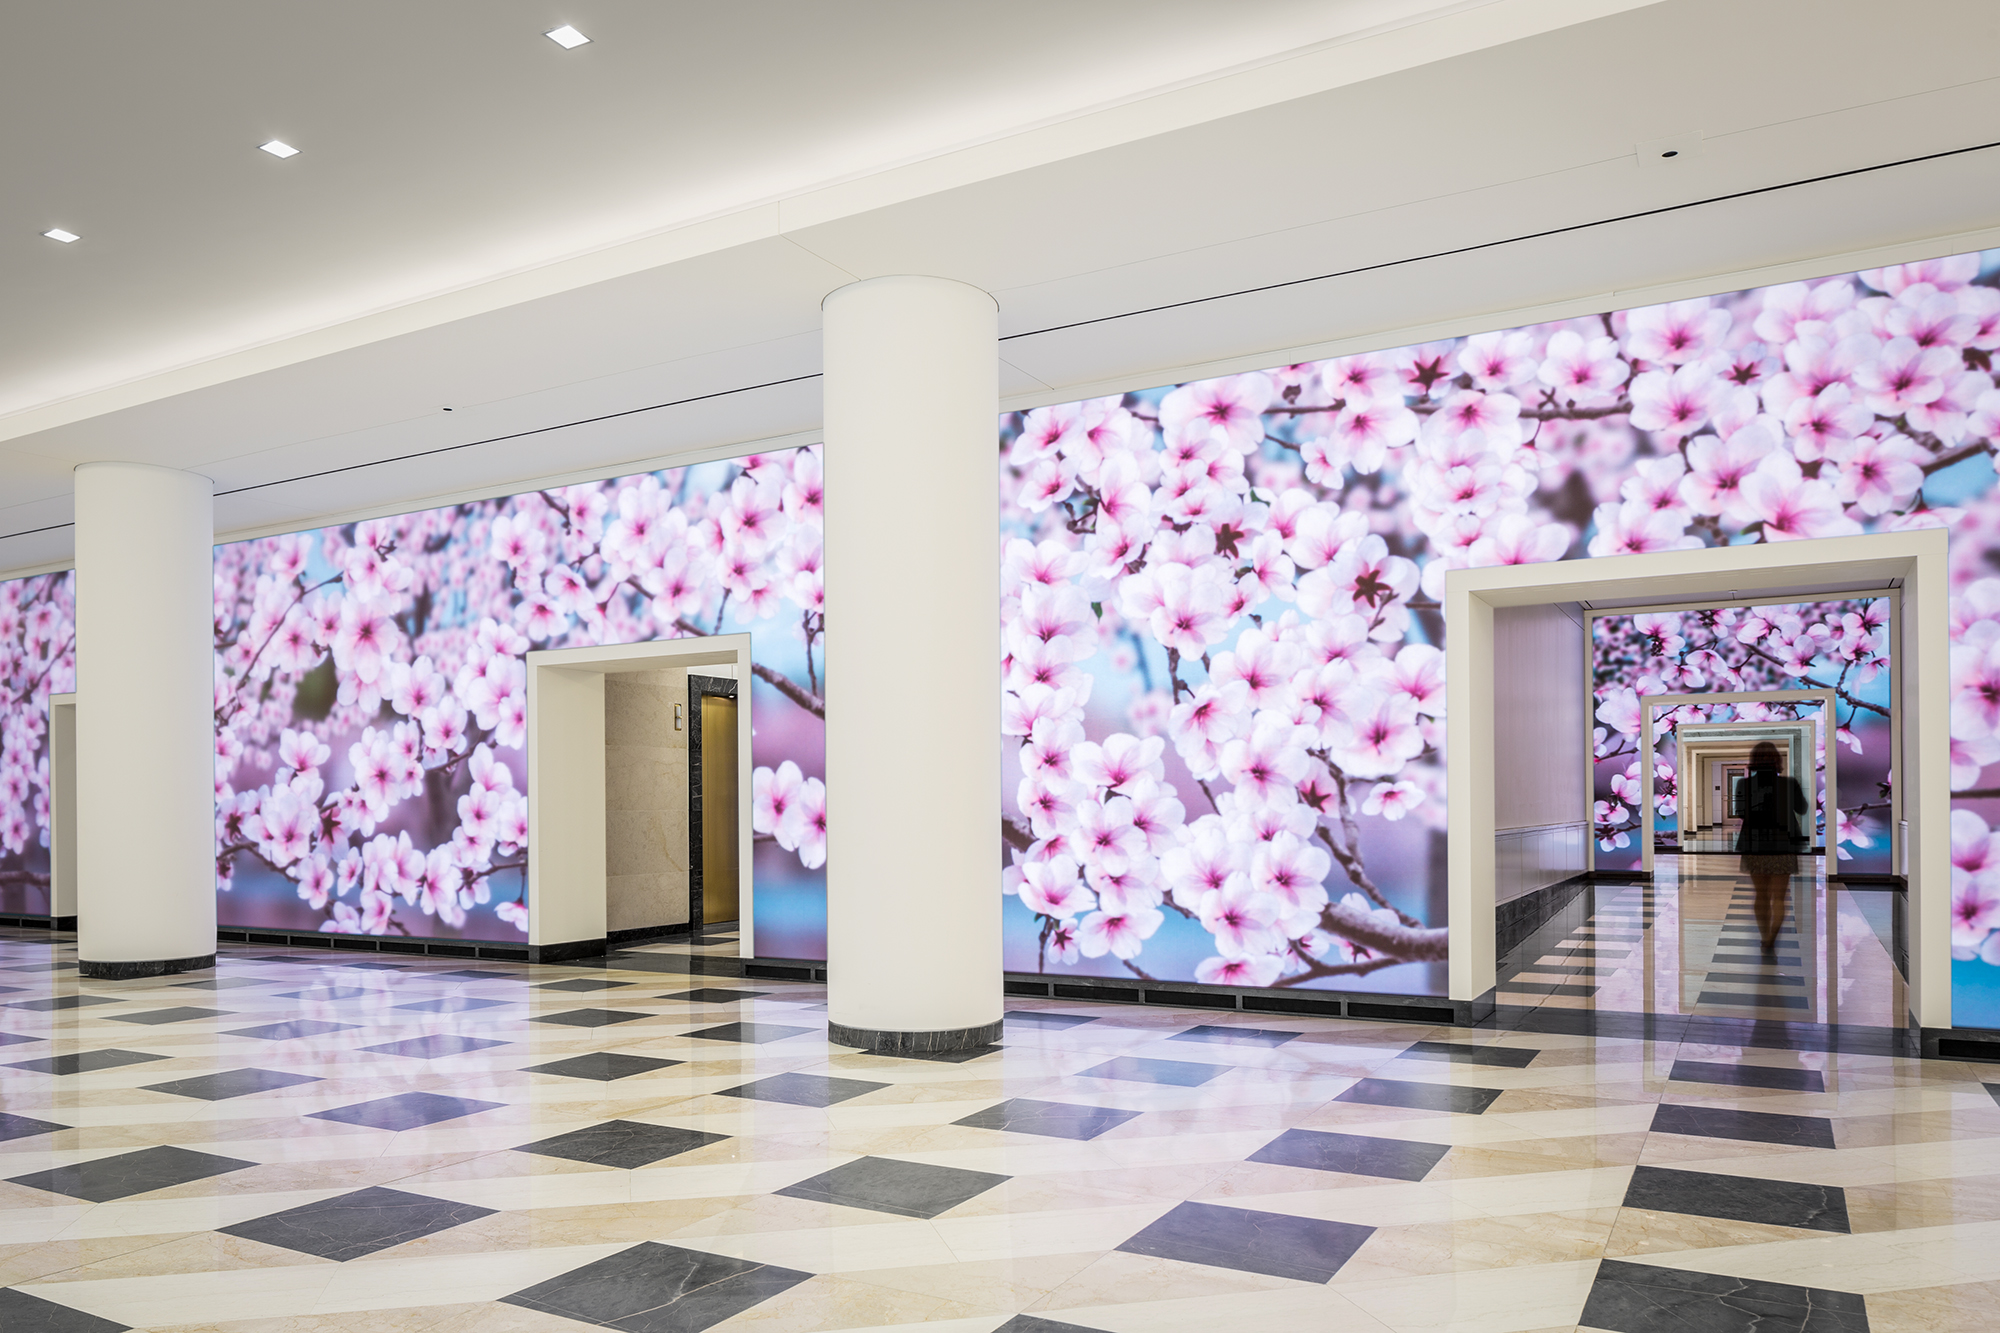 New LED Video Displays Installed in The Mall at Short Hills